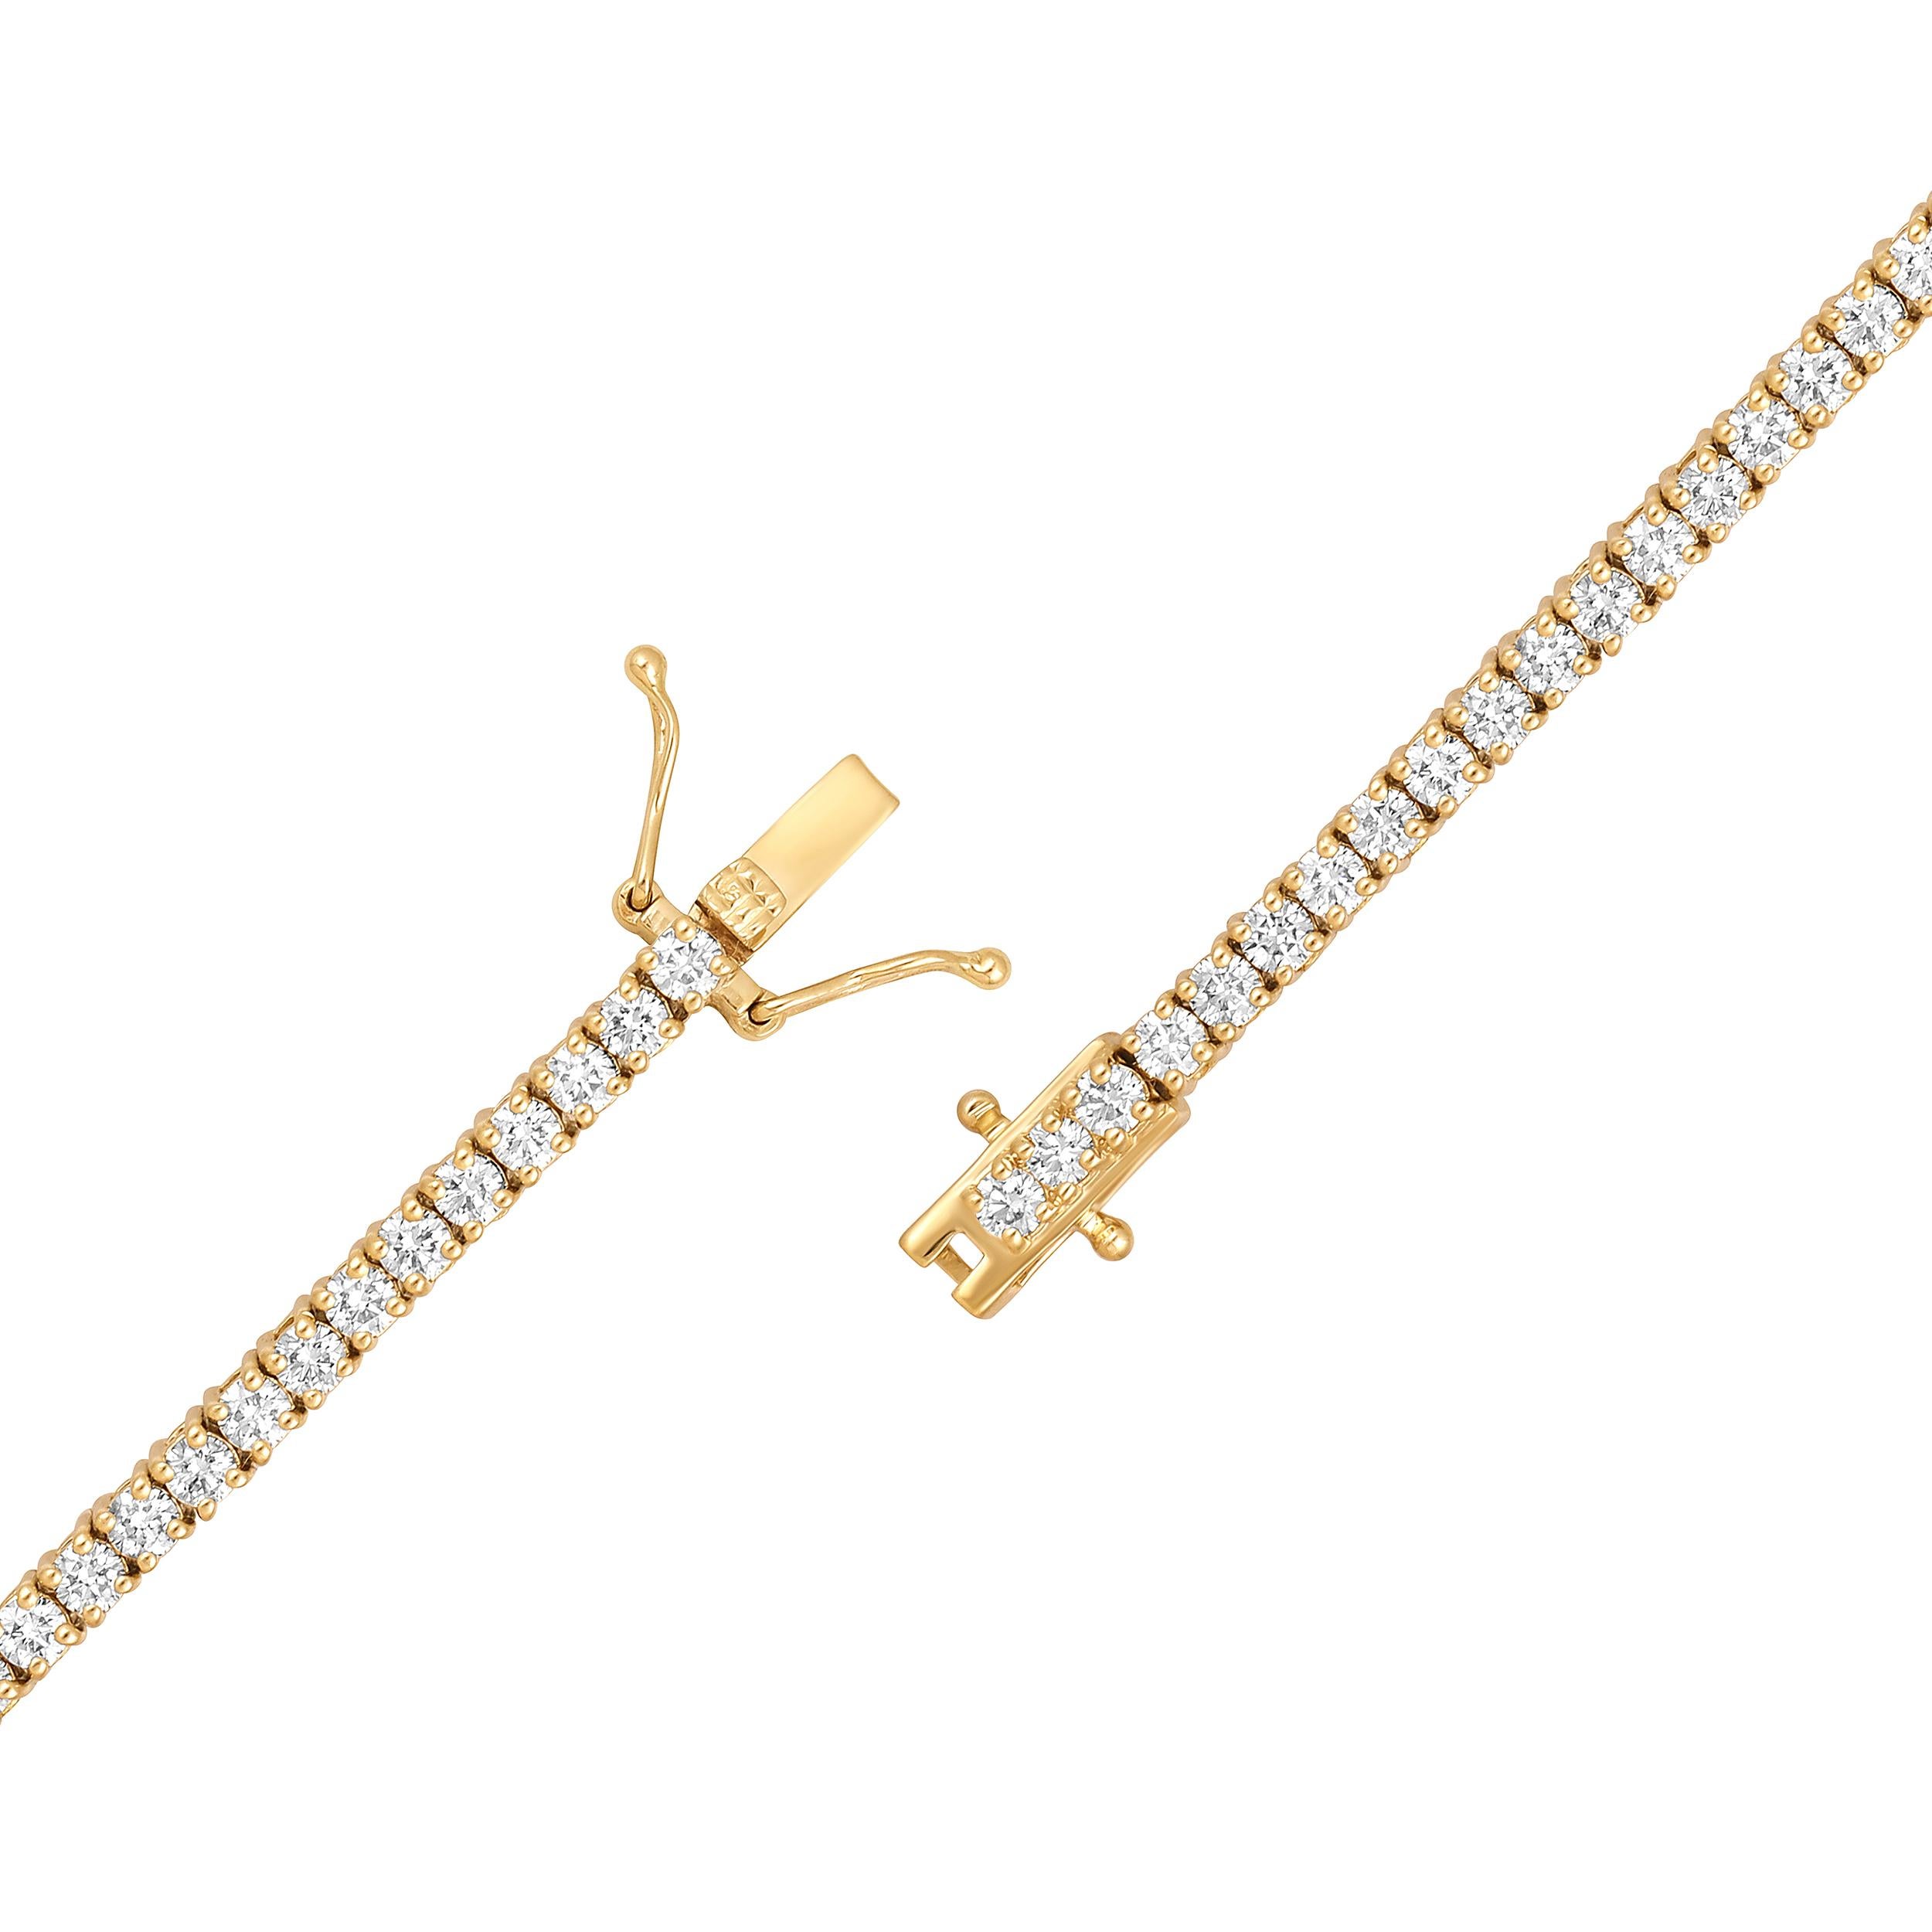 Crafted in 10.52 grams of 14K Yellow Gold, the bracelet contains 76 stones of Round Natural Diamonds with a total of 2.99 carat in G-H color and VS-SI clarity. The bracelet length is 7 inches.

CONTEMPORARY AND TIMELESS ESSENCE: Crafted in